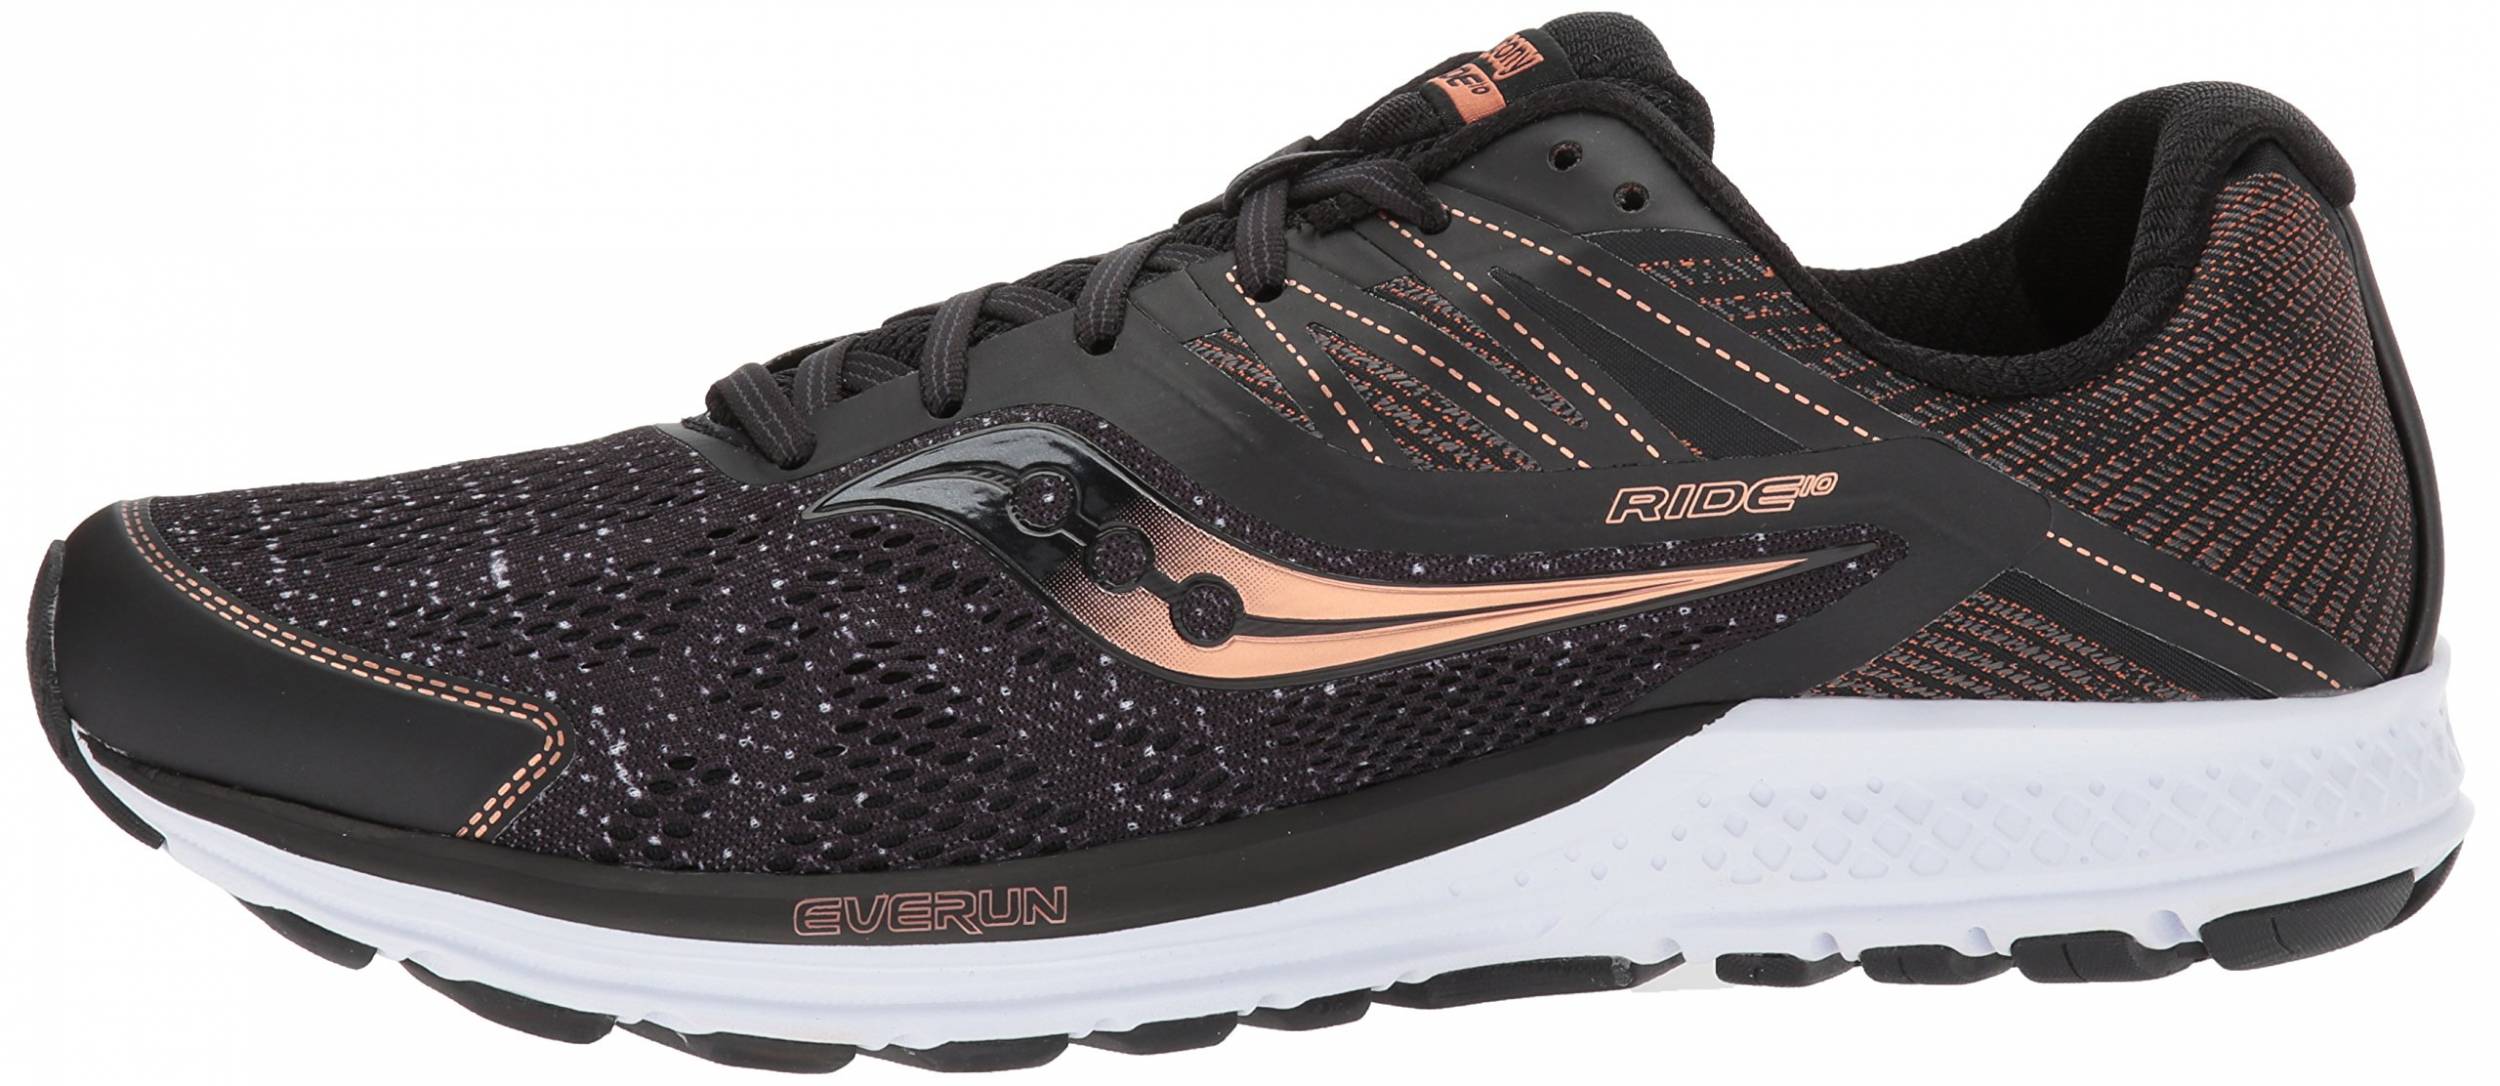 $151 + Review of Saucony Ride 10 